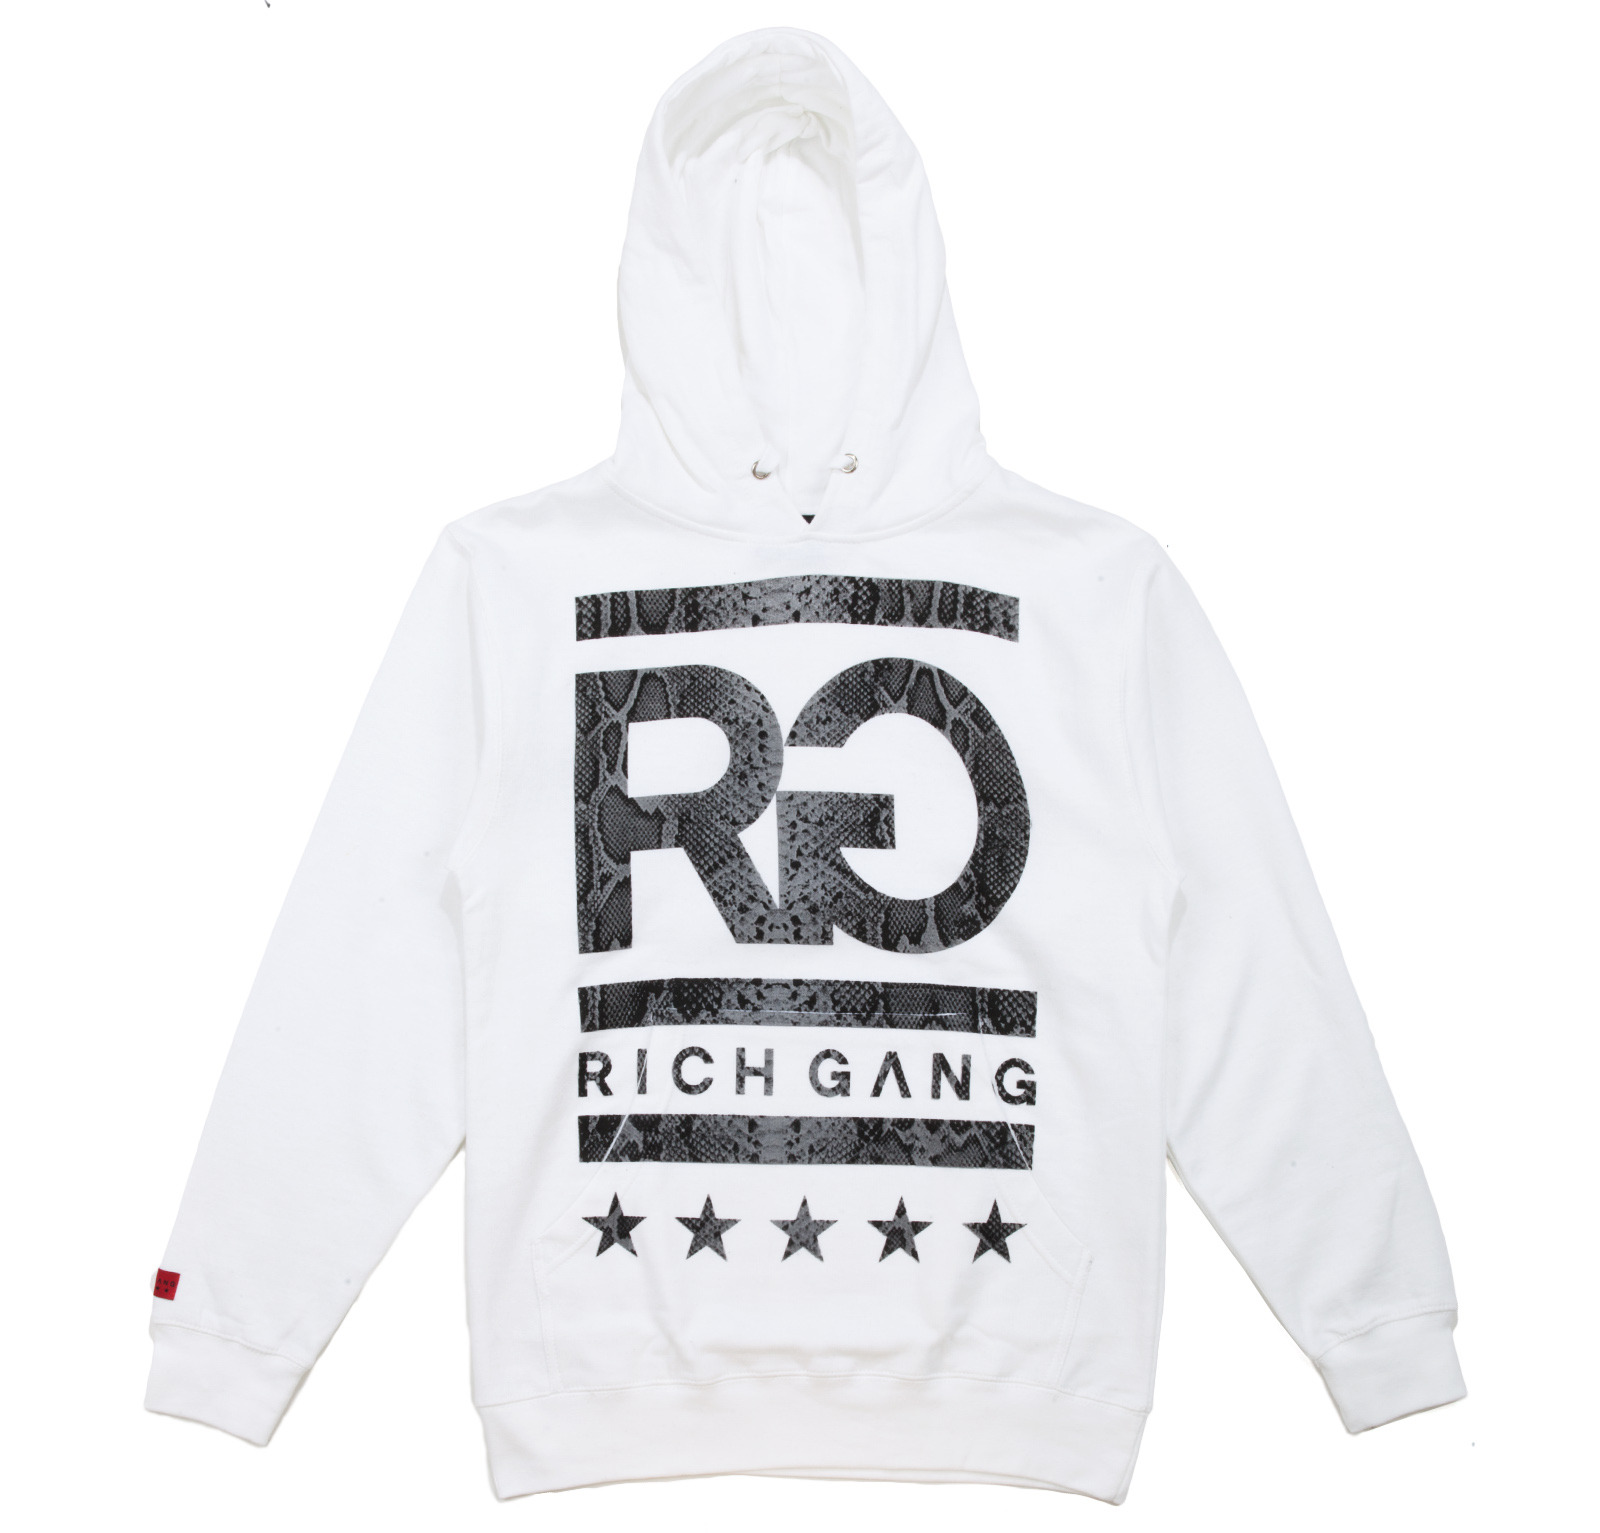 Rg Rich Gang Mogul Media Tv with Famous Rich Gang Clothing Line – Top Design Source